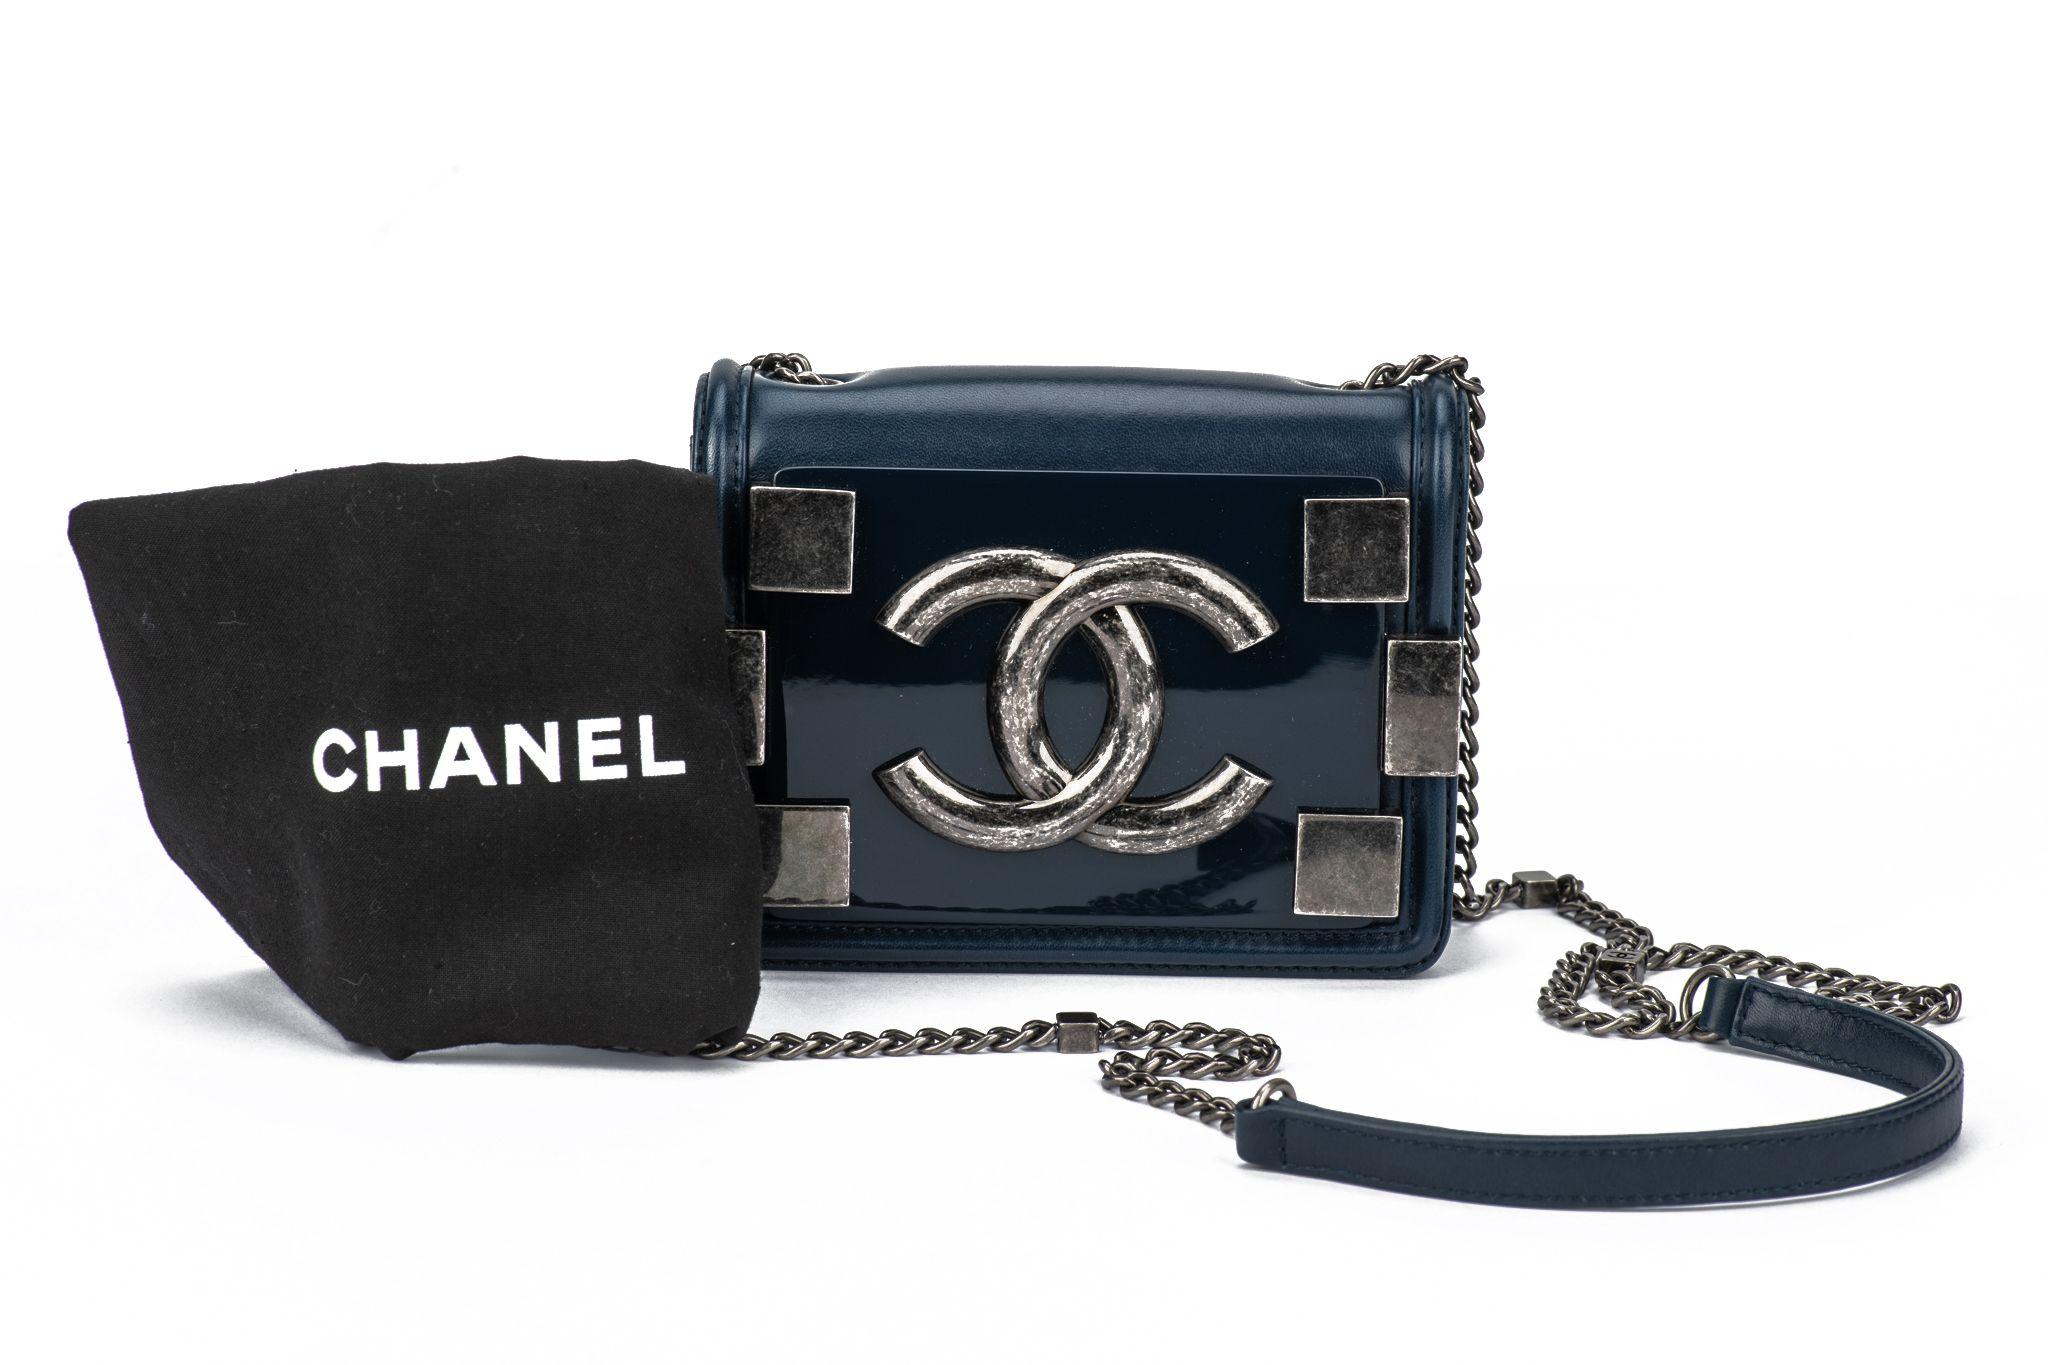 Chanel Boy Brick Flap Bag made of plexiglass and lambskin leather. The interior features red canvas. Collection #18, 2013/2014. Shoulder drop 23.5. The bag is in excellent condition and comes with the original dustcover, the hologram and the id card.